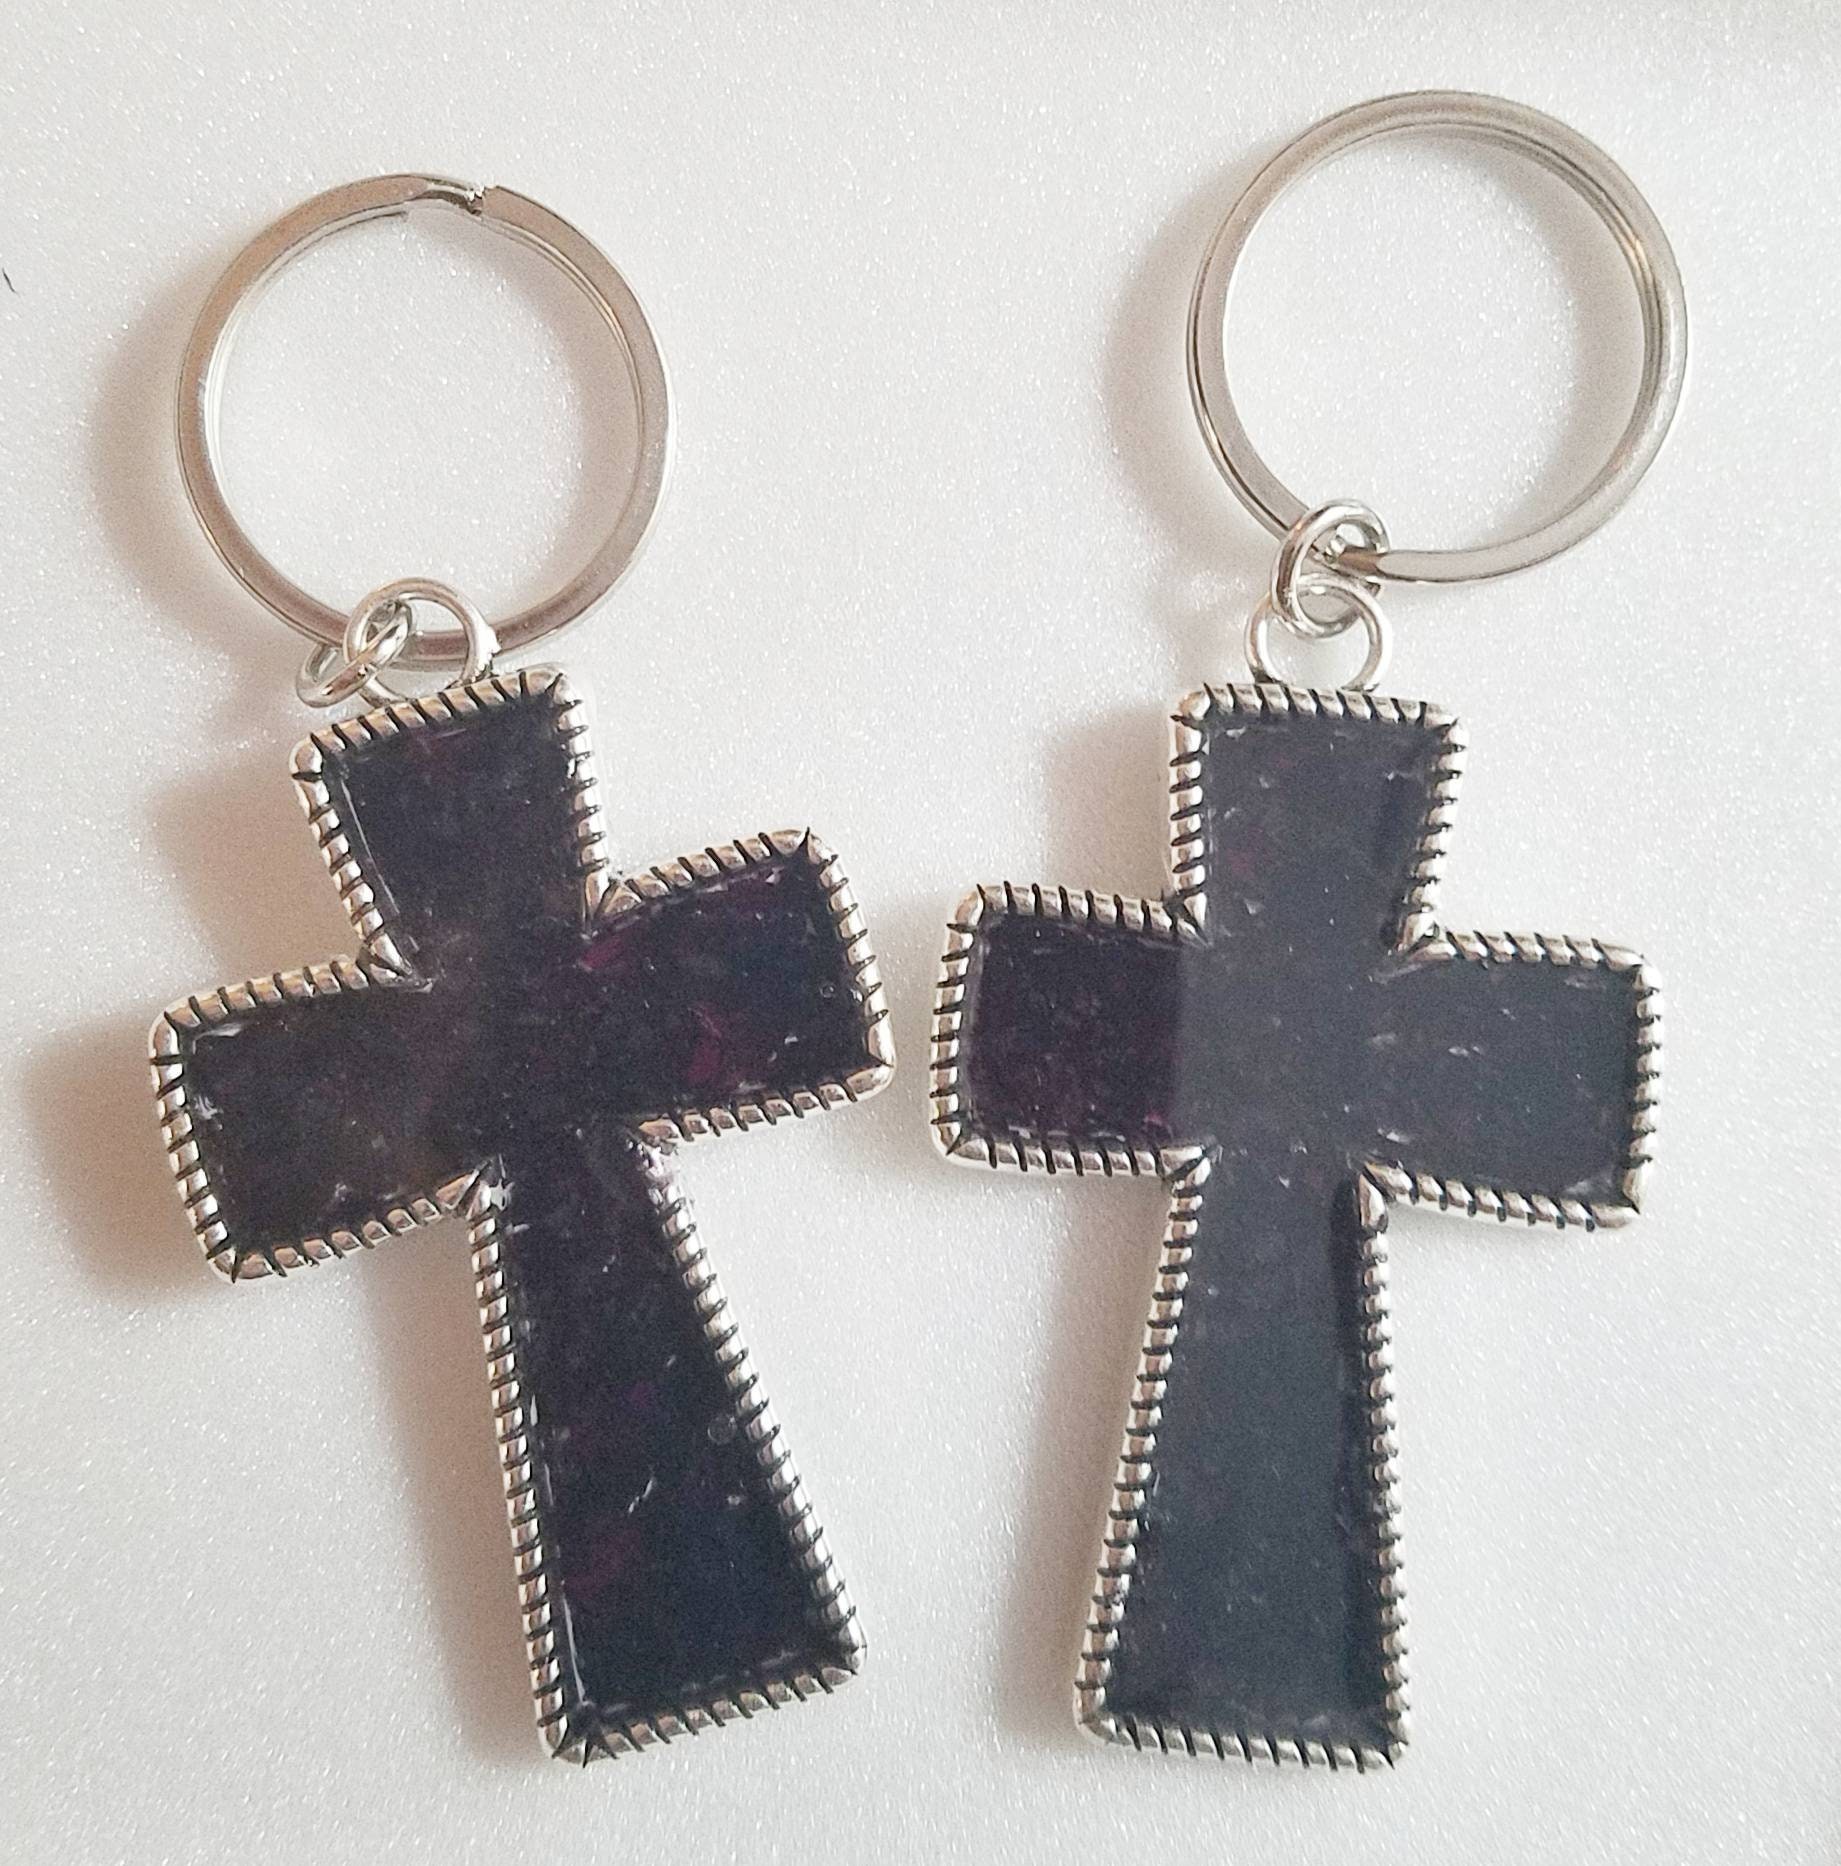 Dried Funeral Flower Cross Keychain Memorial Jewelry Funeral - Etsy